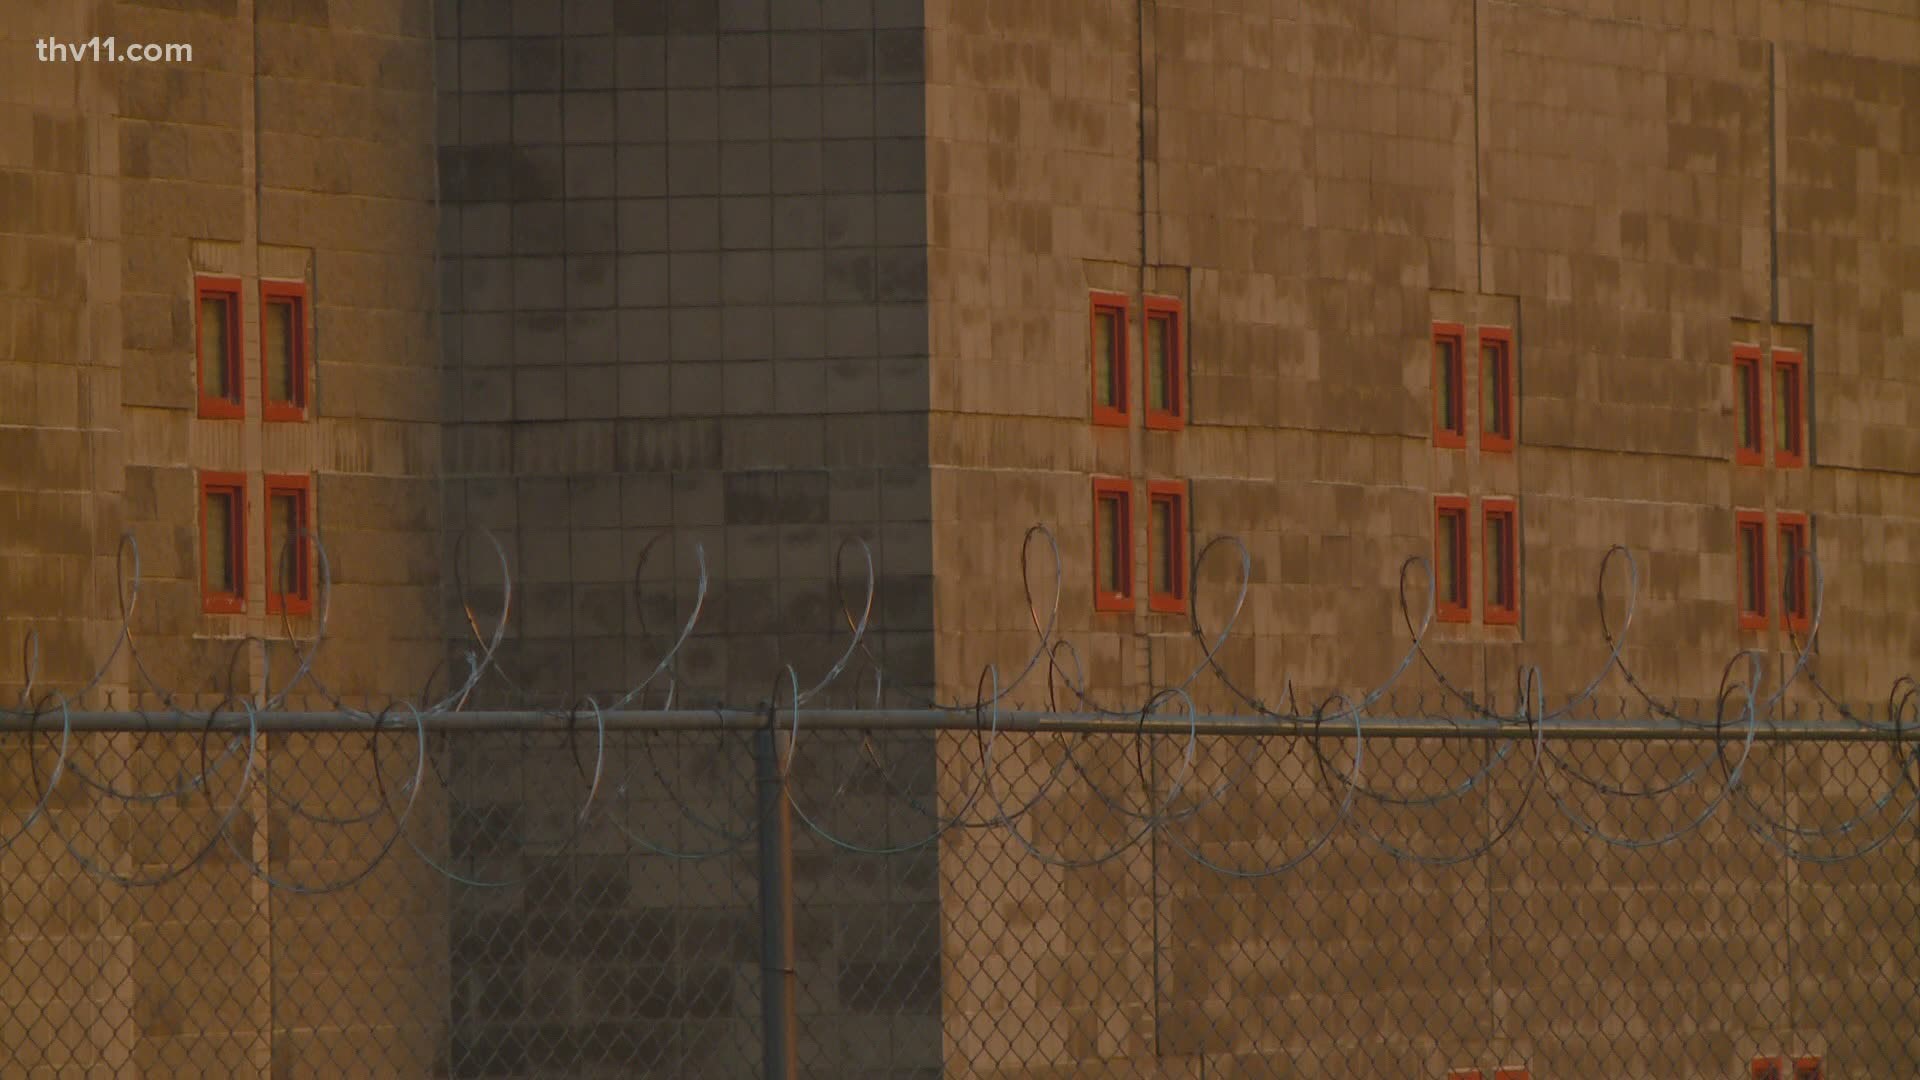 A Pulaski County inmate was found dead in his cell this morning.